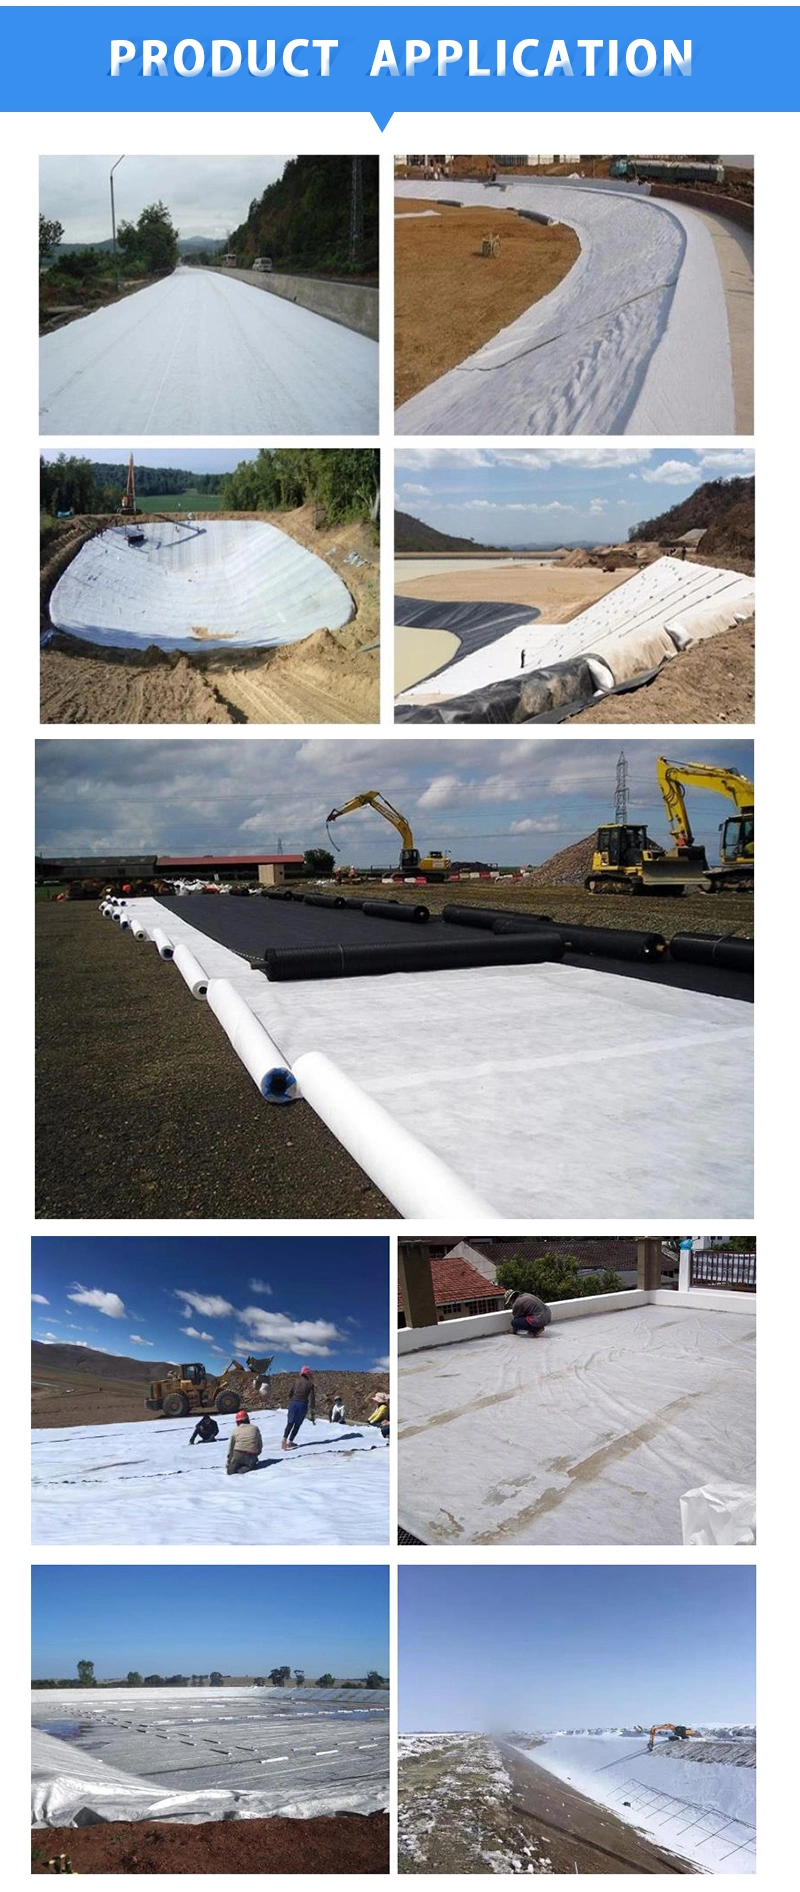 600g M2 High Quality PP Pet Woven Building Construction Nonwoven Geotextile Fabric